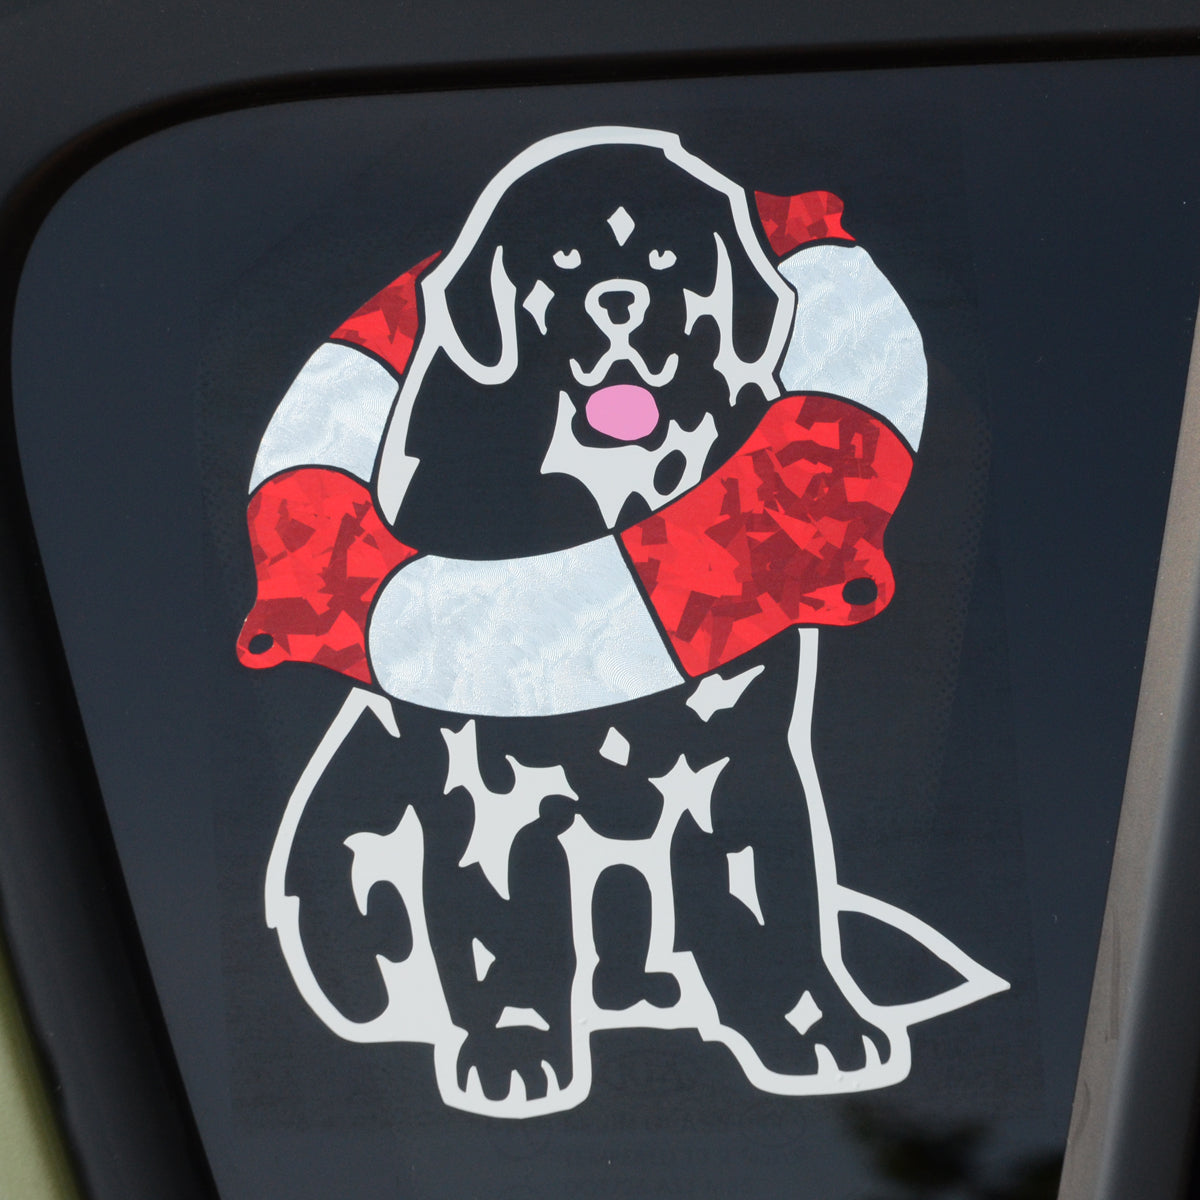 "Newf with Life Ring Decal For Tinted Glass"